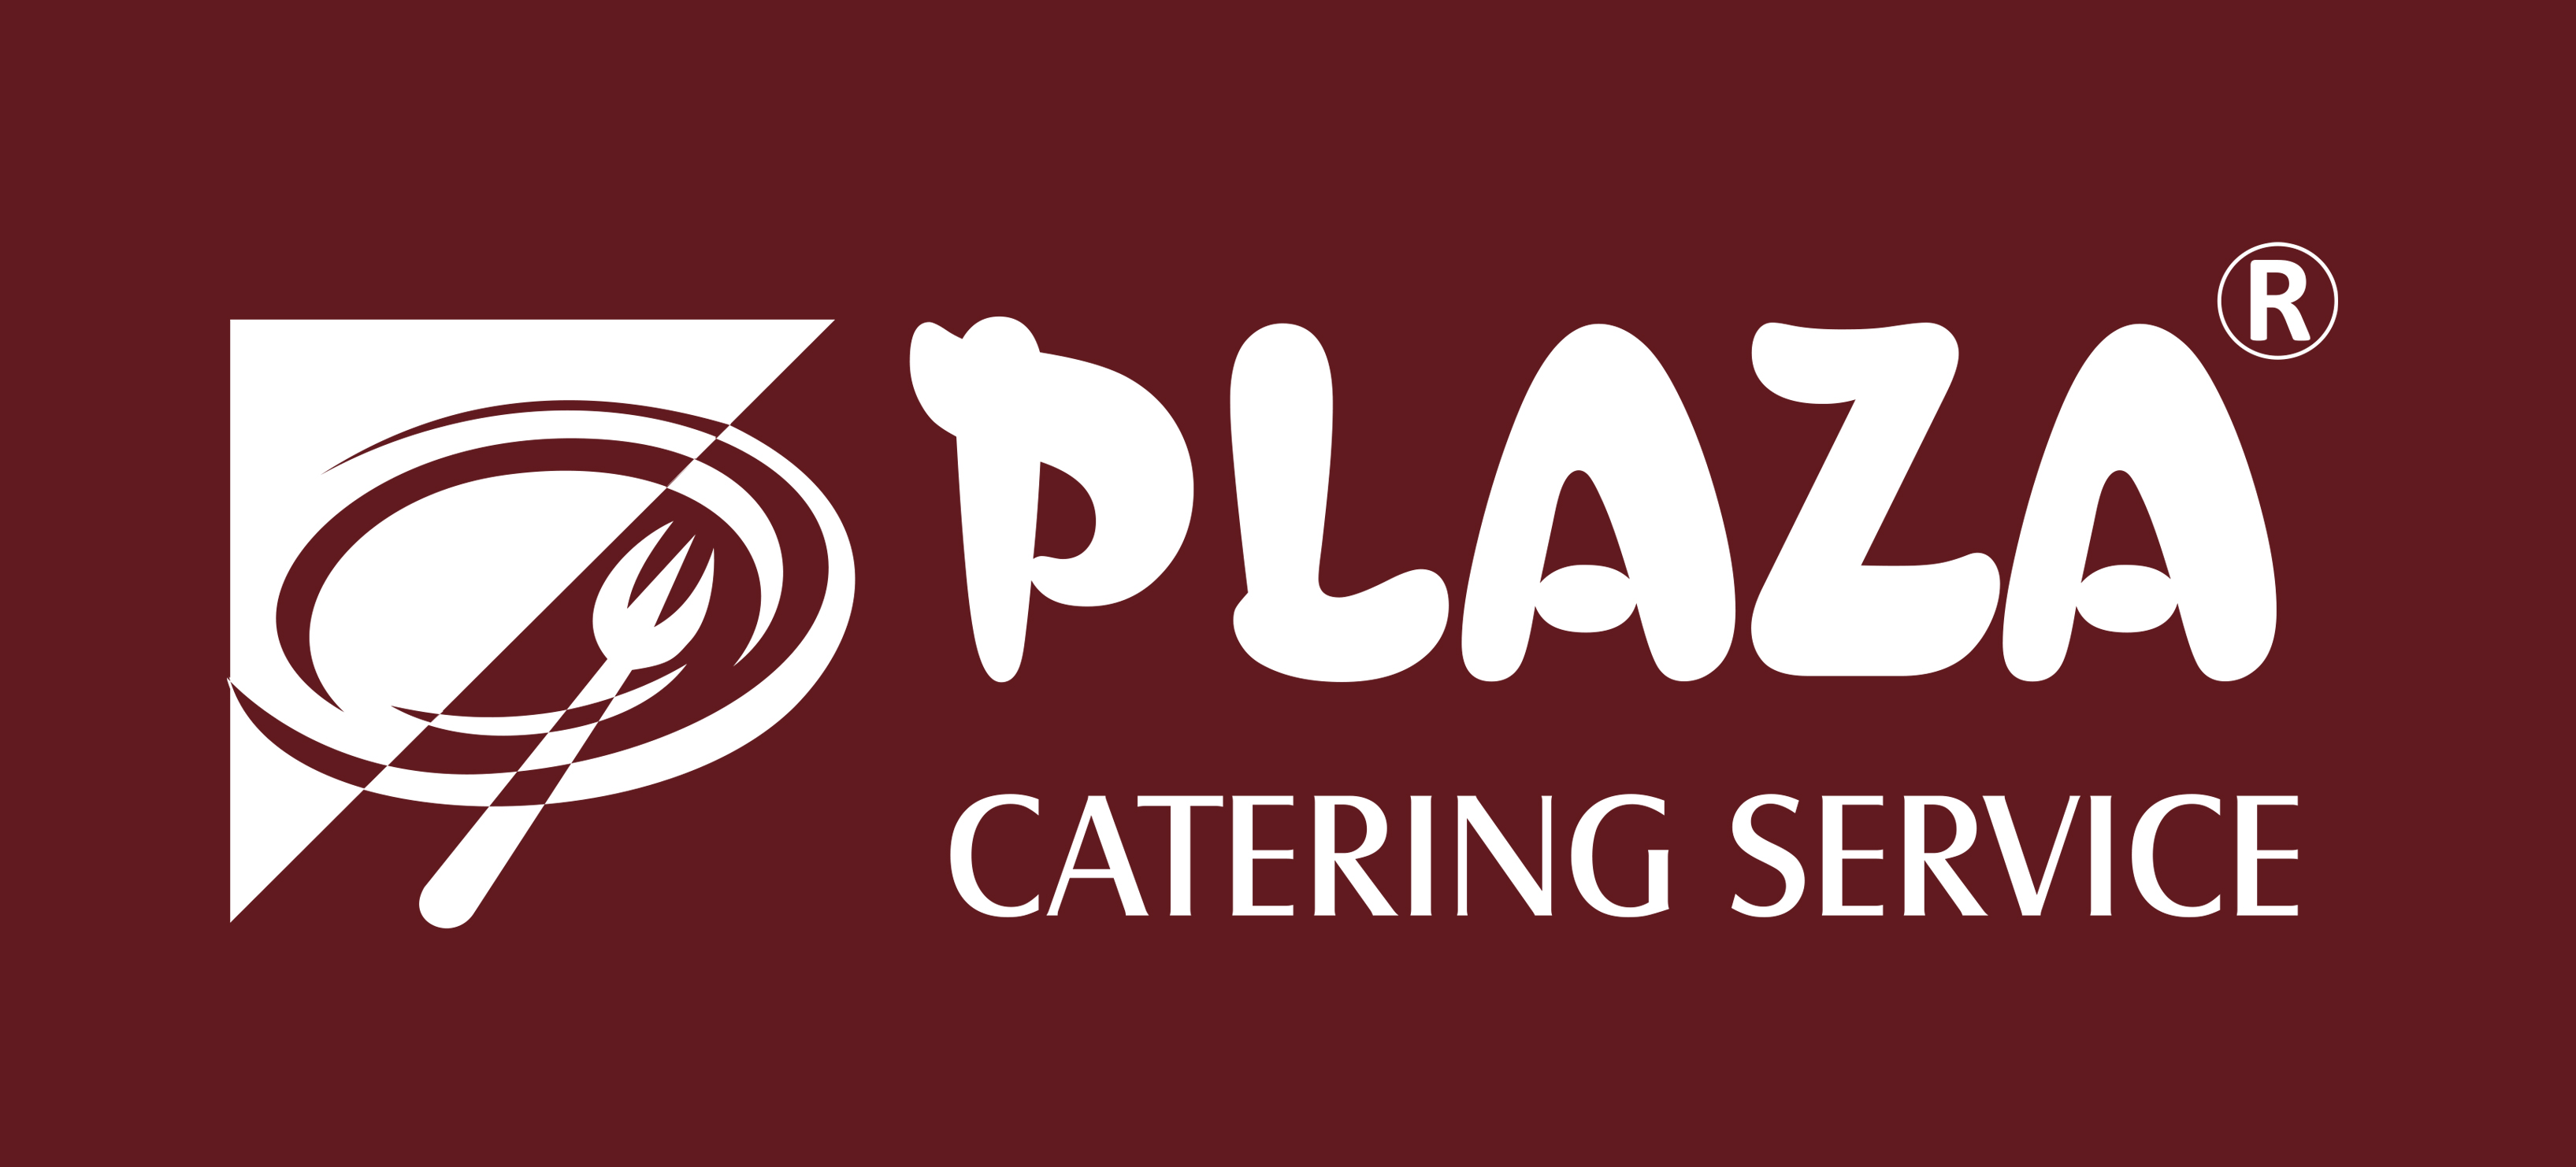 Plaza Catering|Photographer|Event Services